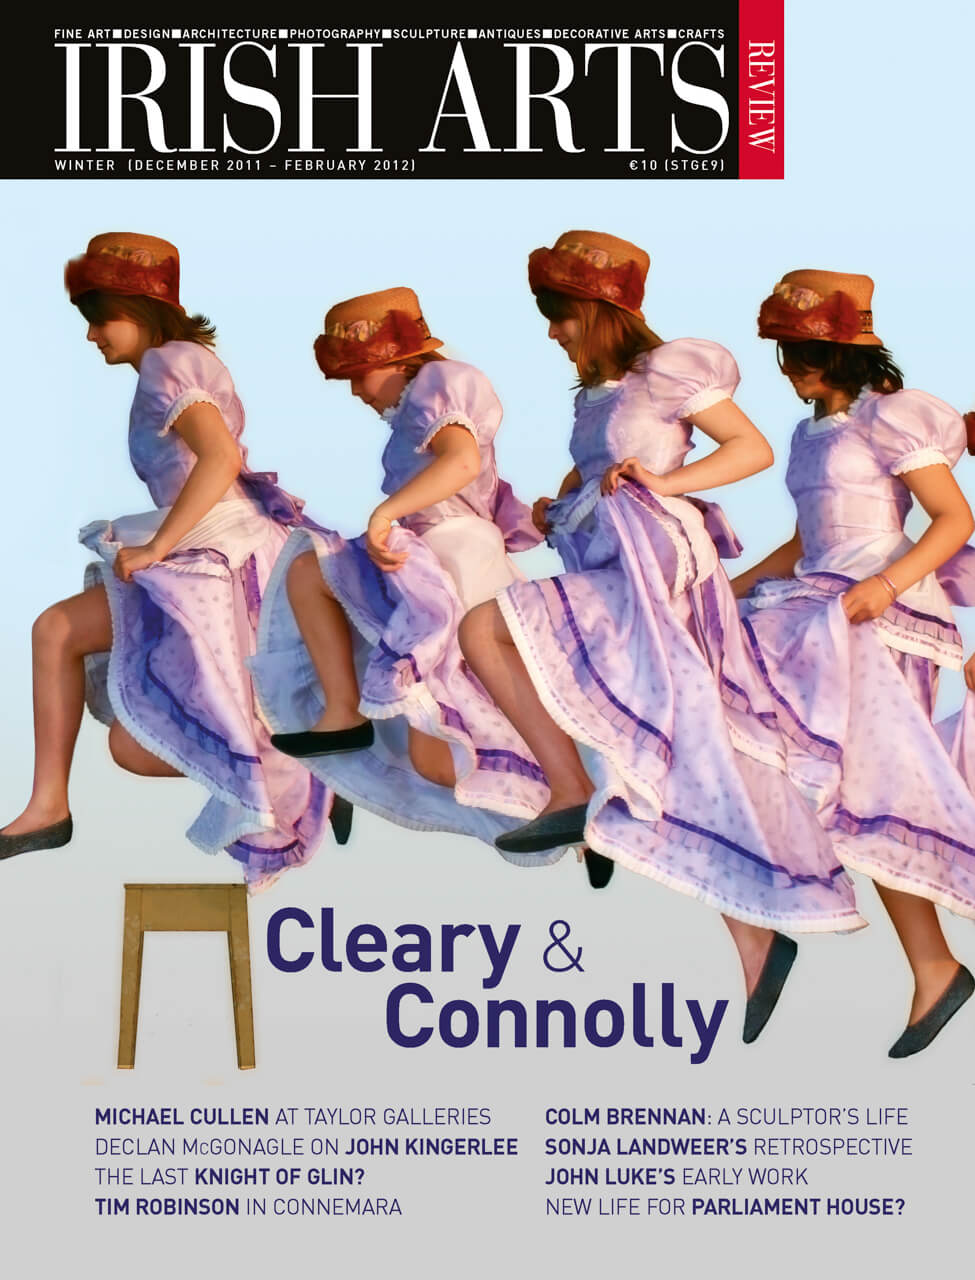 Cleary & Connolly sans frontières